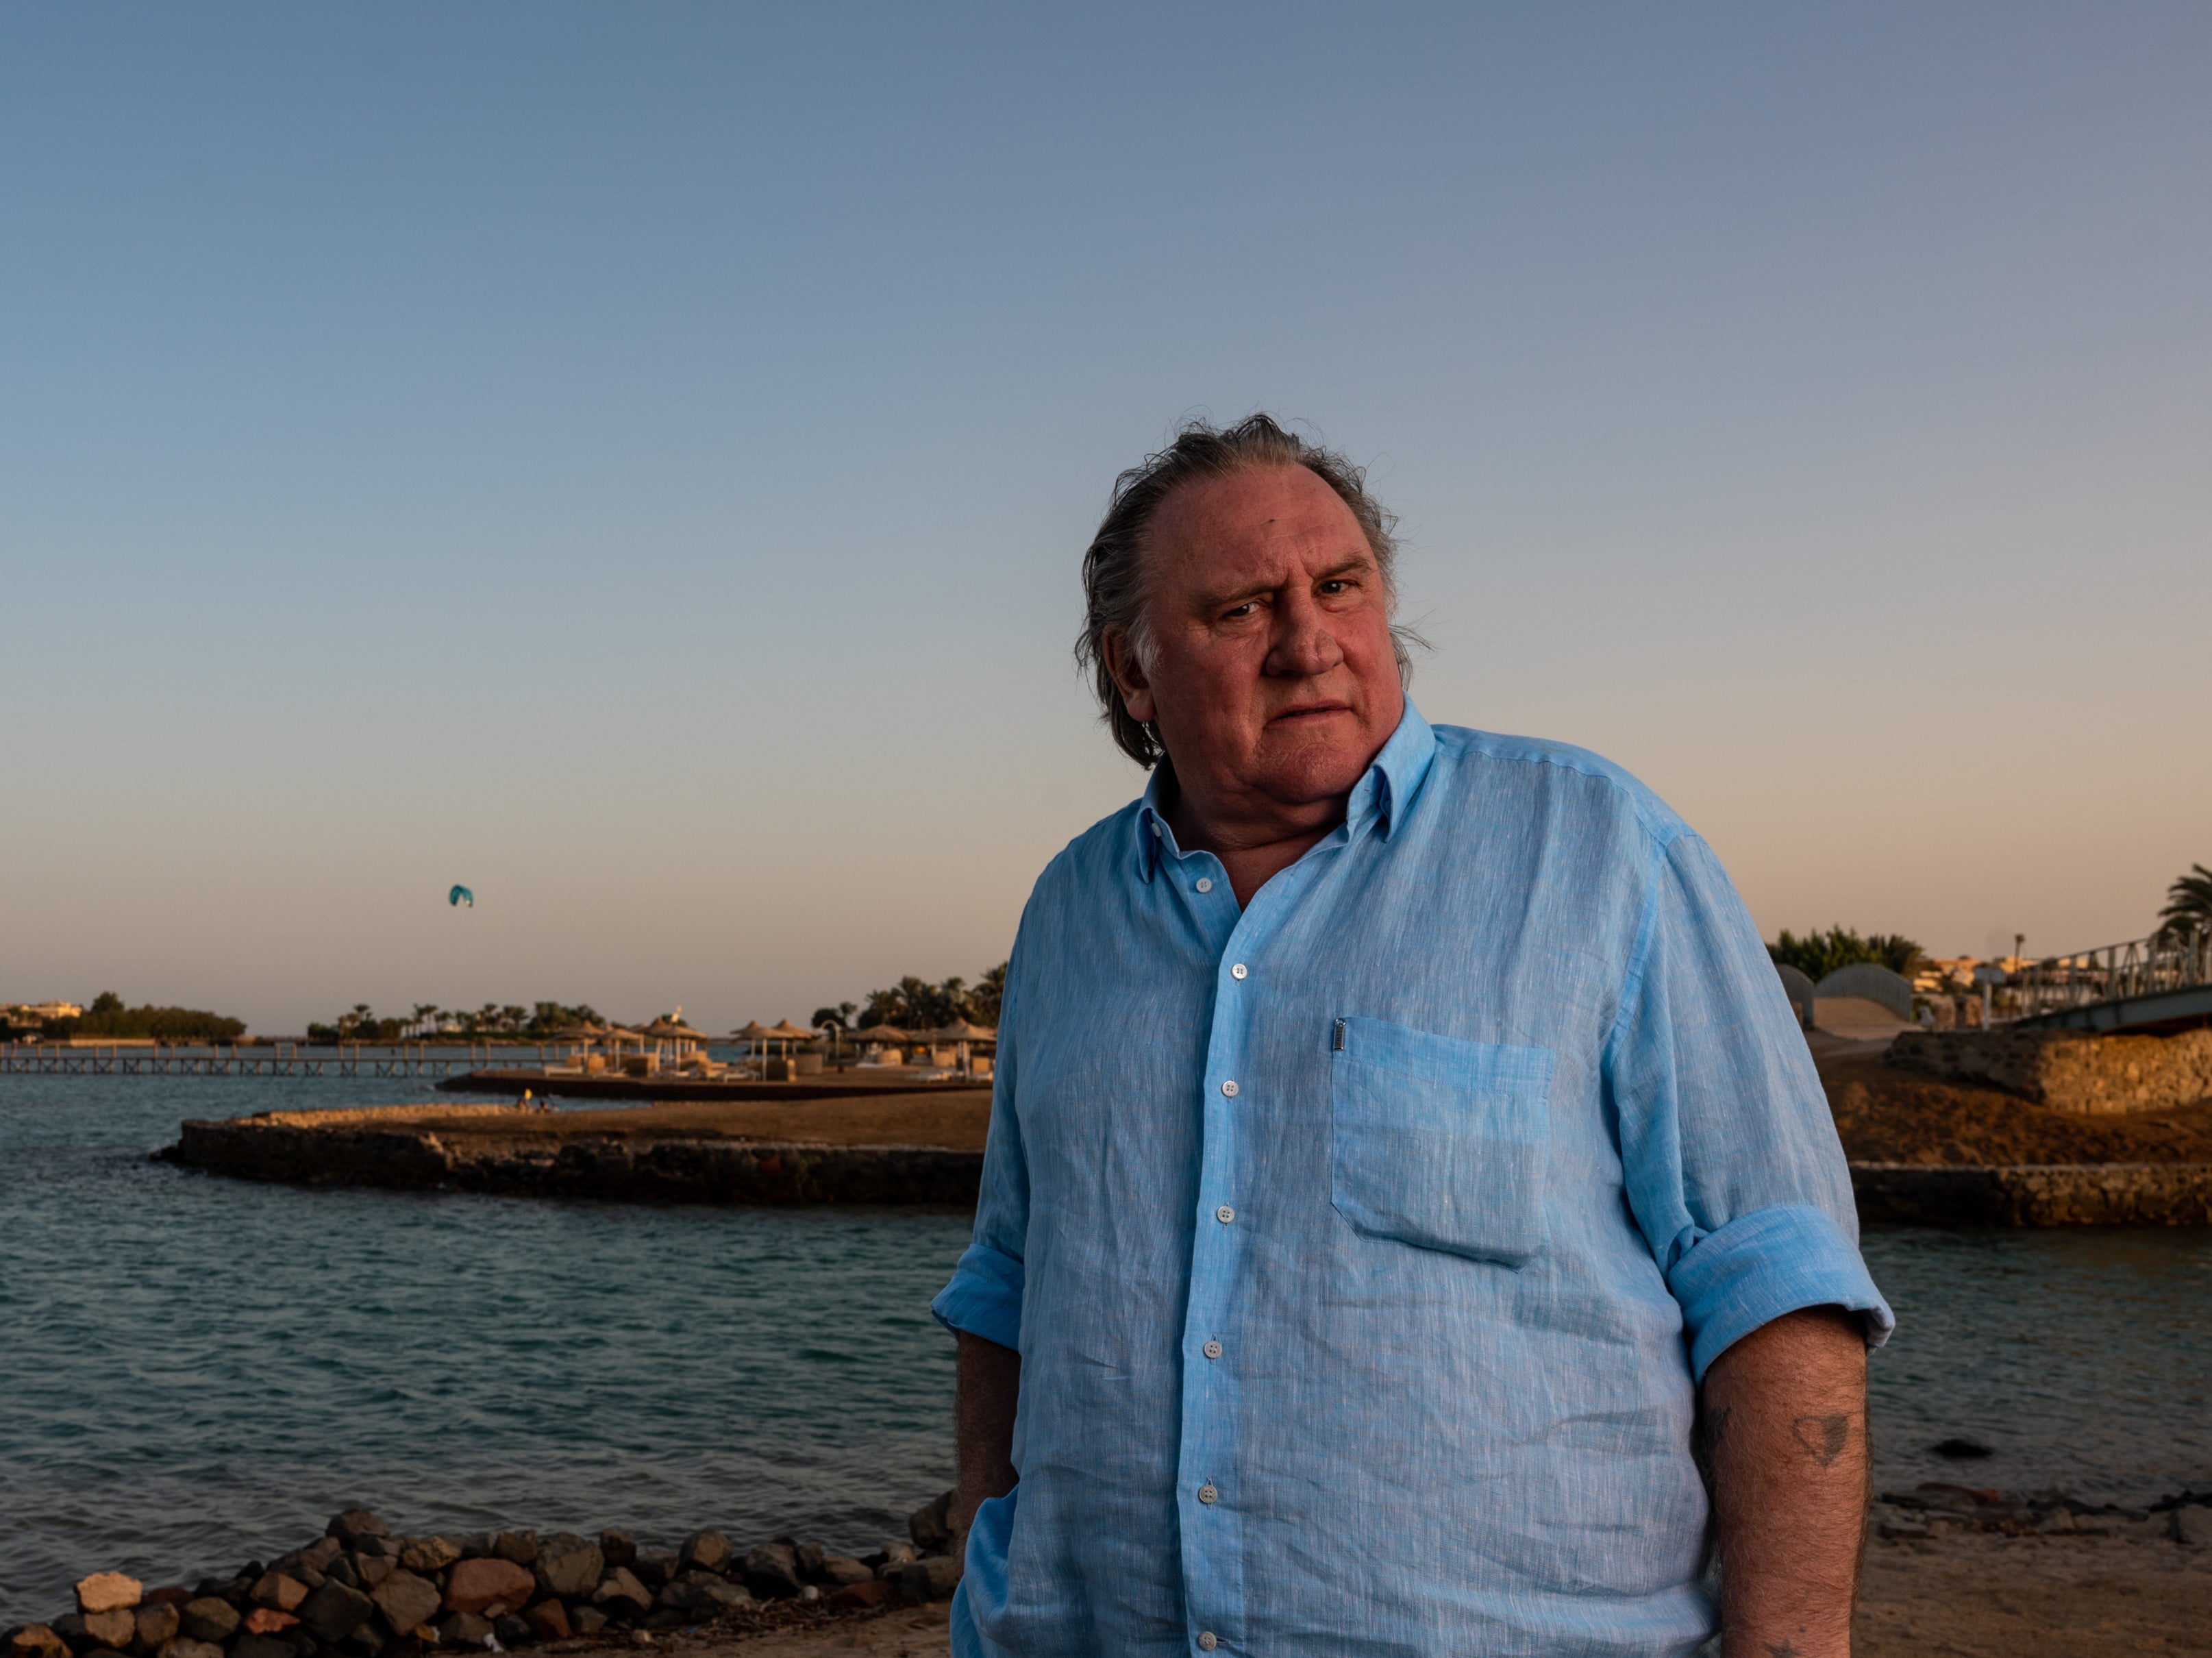 Gérard Depardieu will be investigated after an accusation of rape